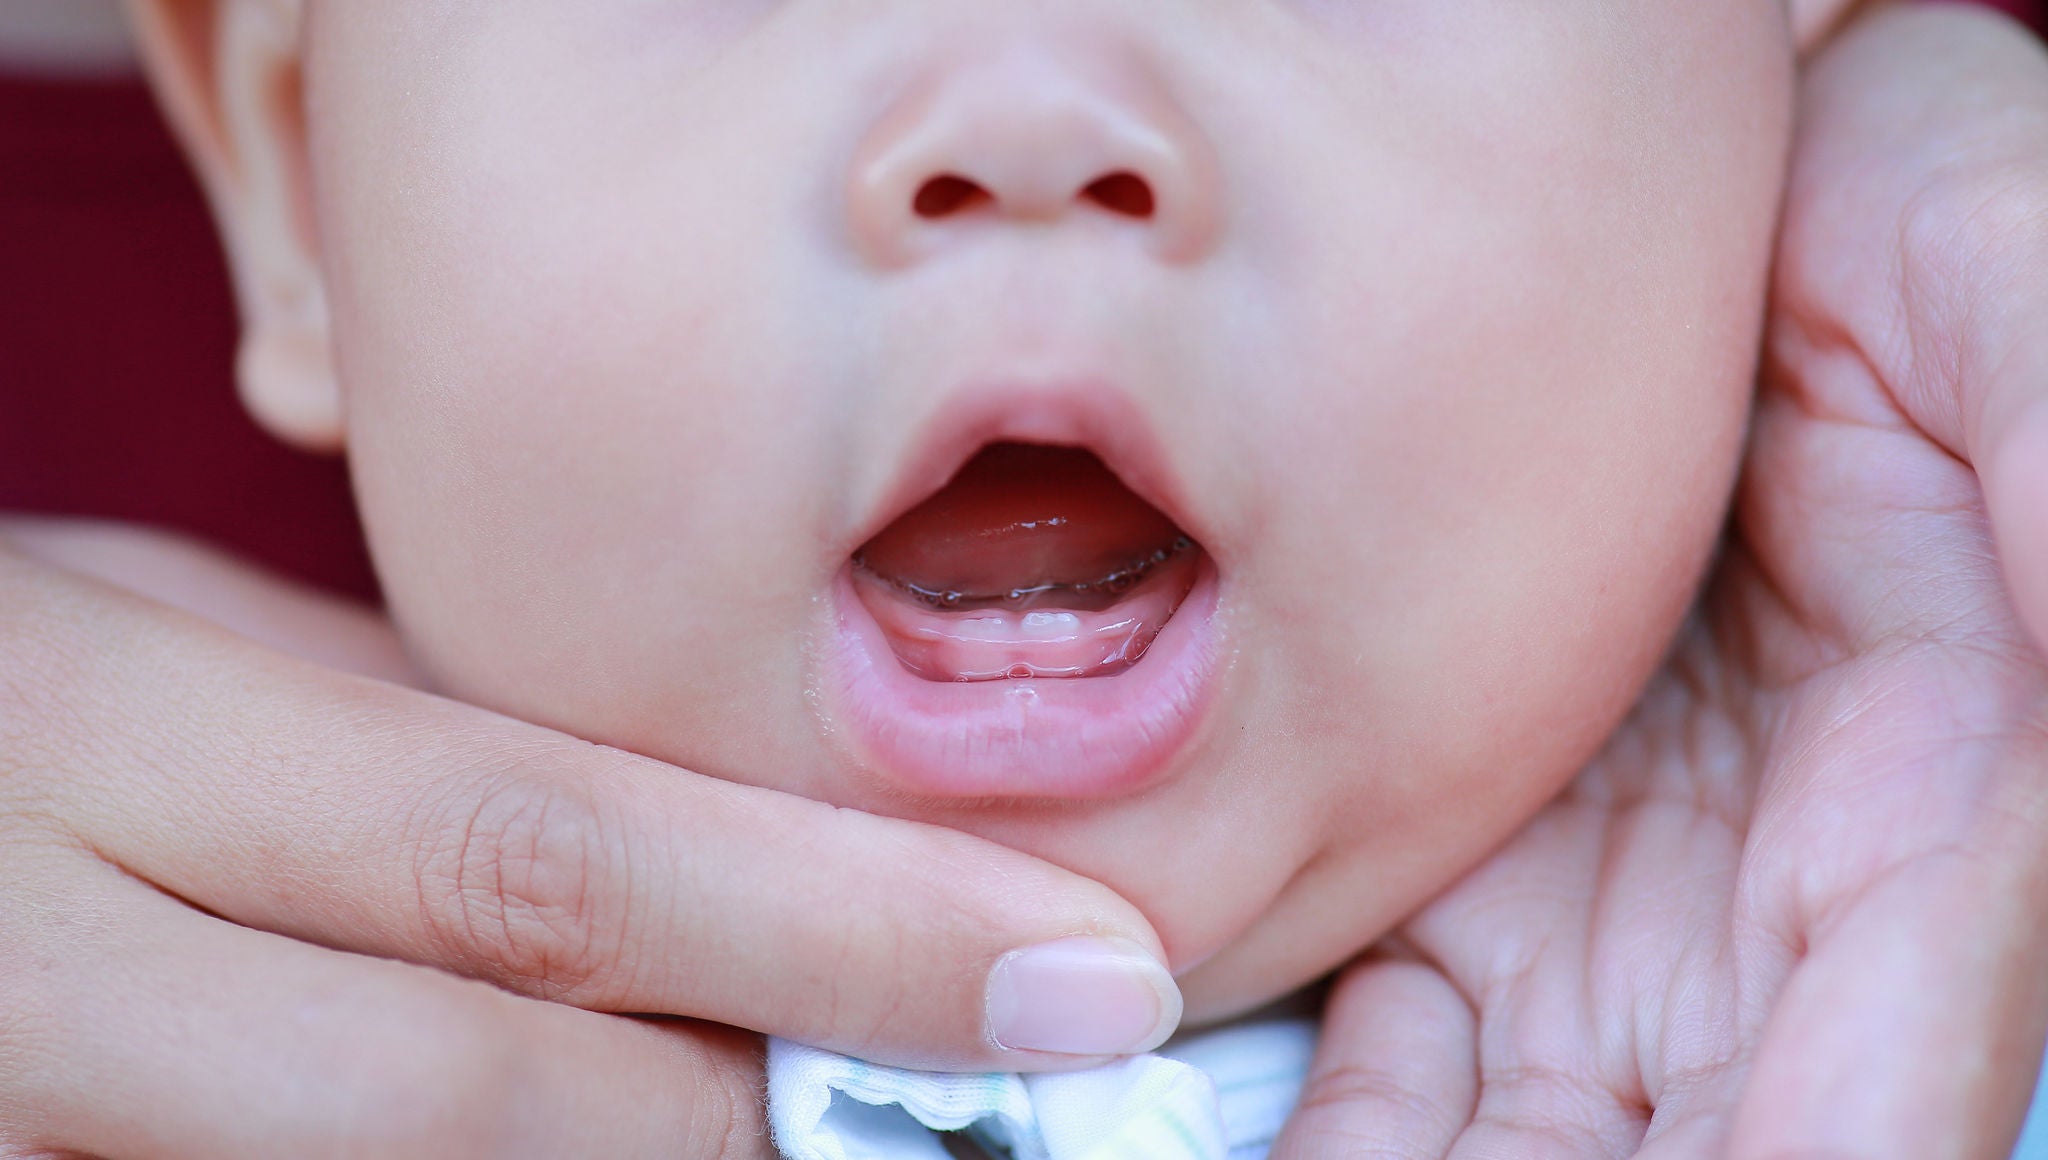 Close-up mother hands open baby mouth to examine first teeth. Infant primary tooth.